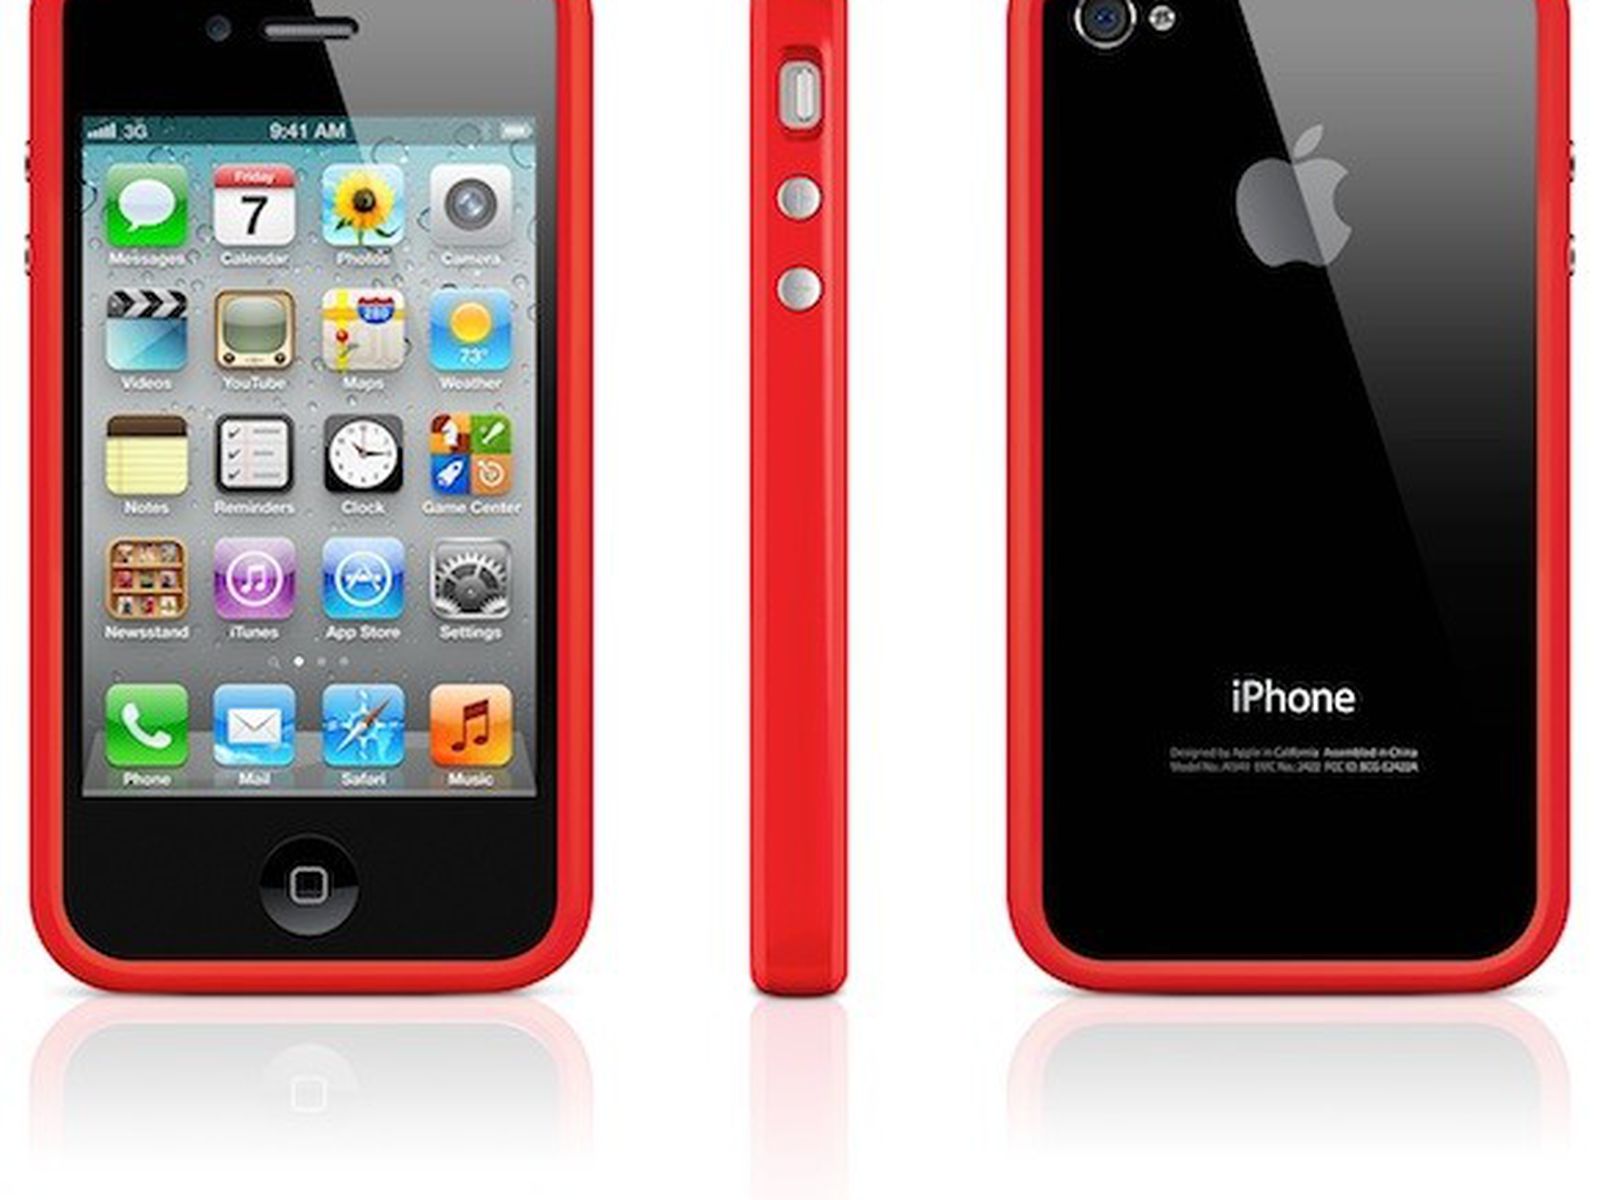 Apple (PRODUCT) Bumper for iPhone 4S/4 -